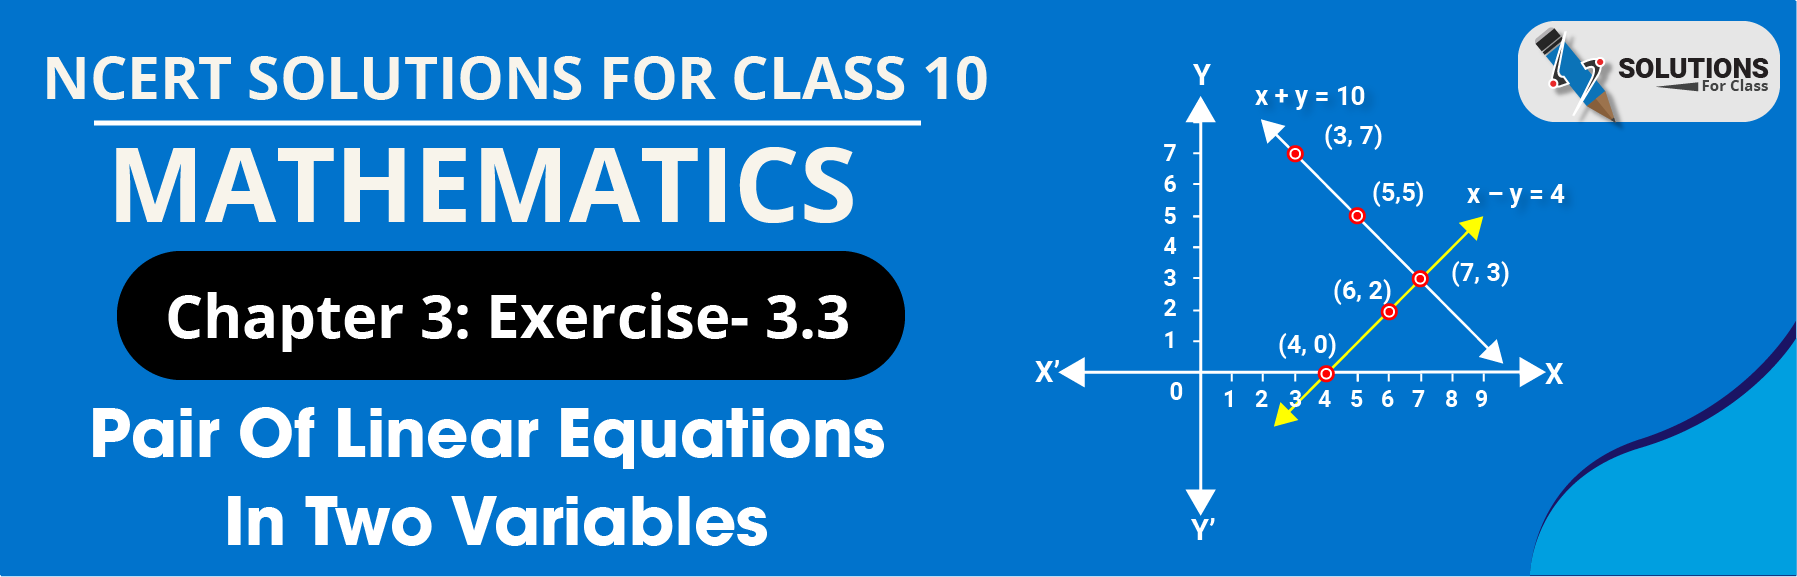 NCERT Solution For Class 10, Maths, Pair Of Linear Equations In Two Variables, Exercise 3.3